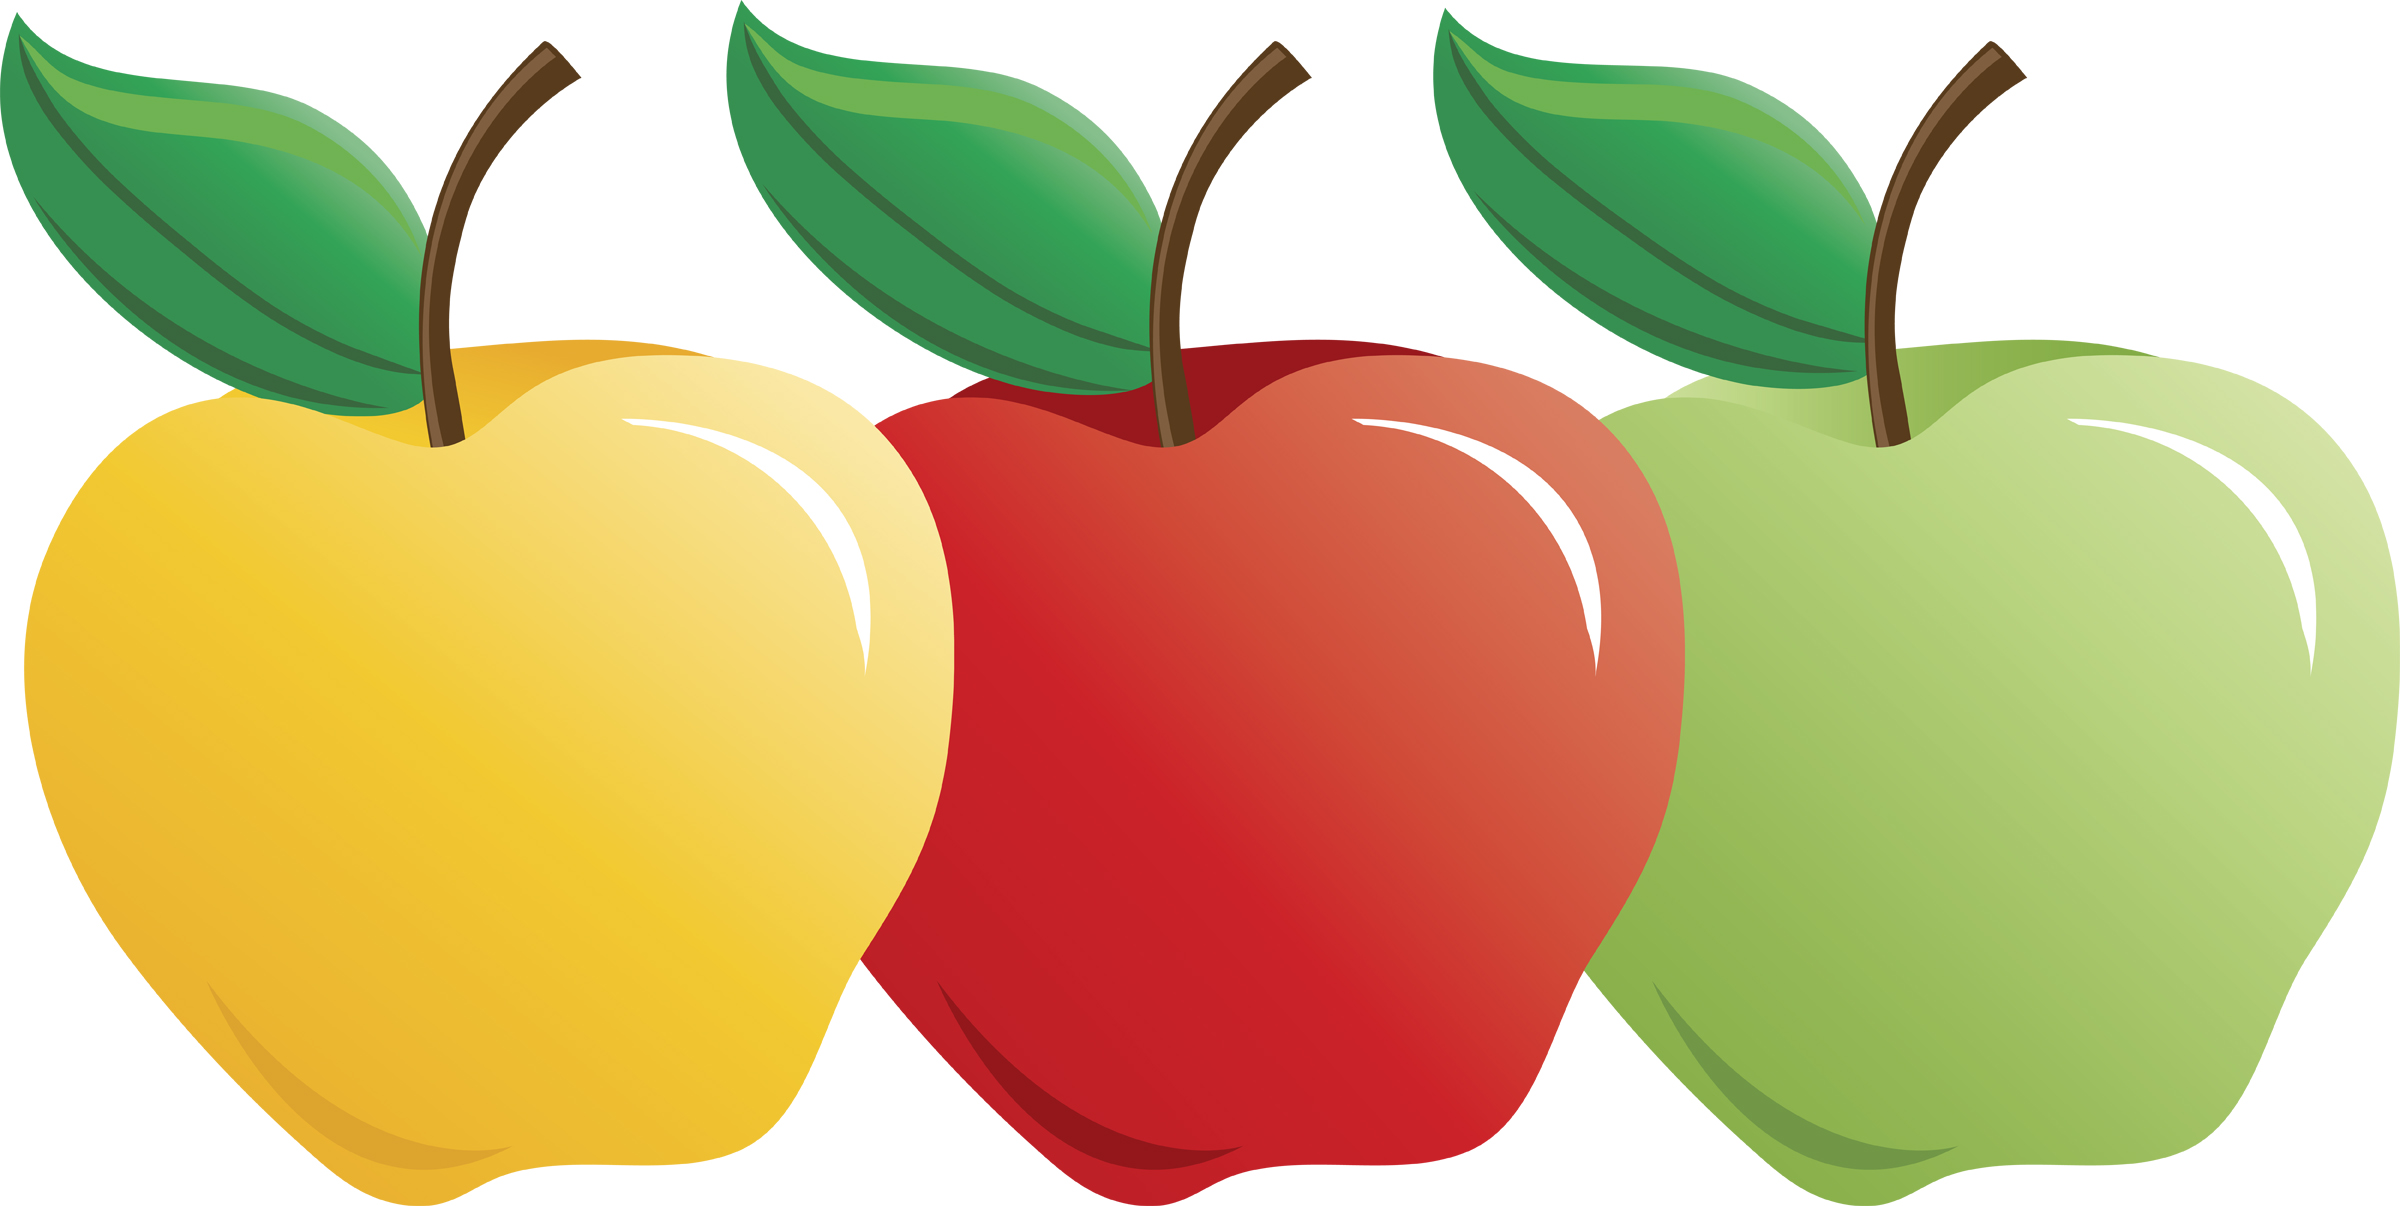 Apple images clipart